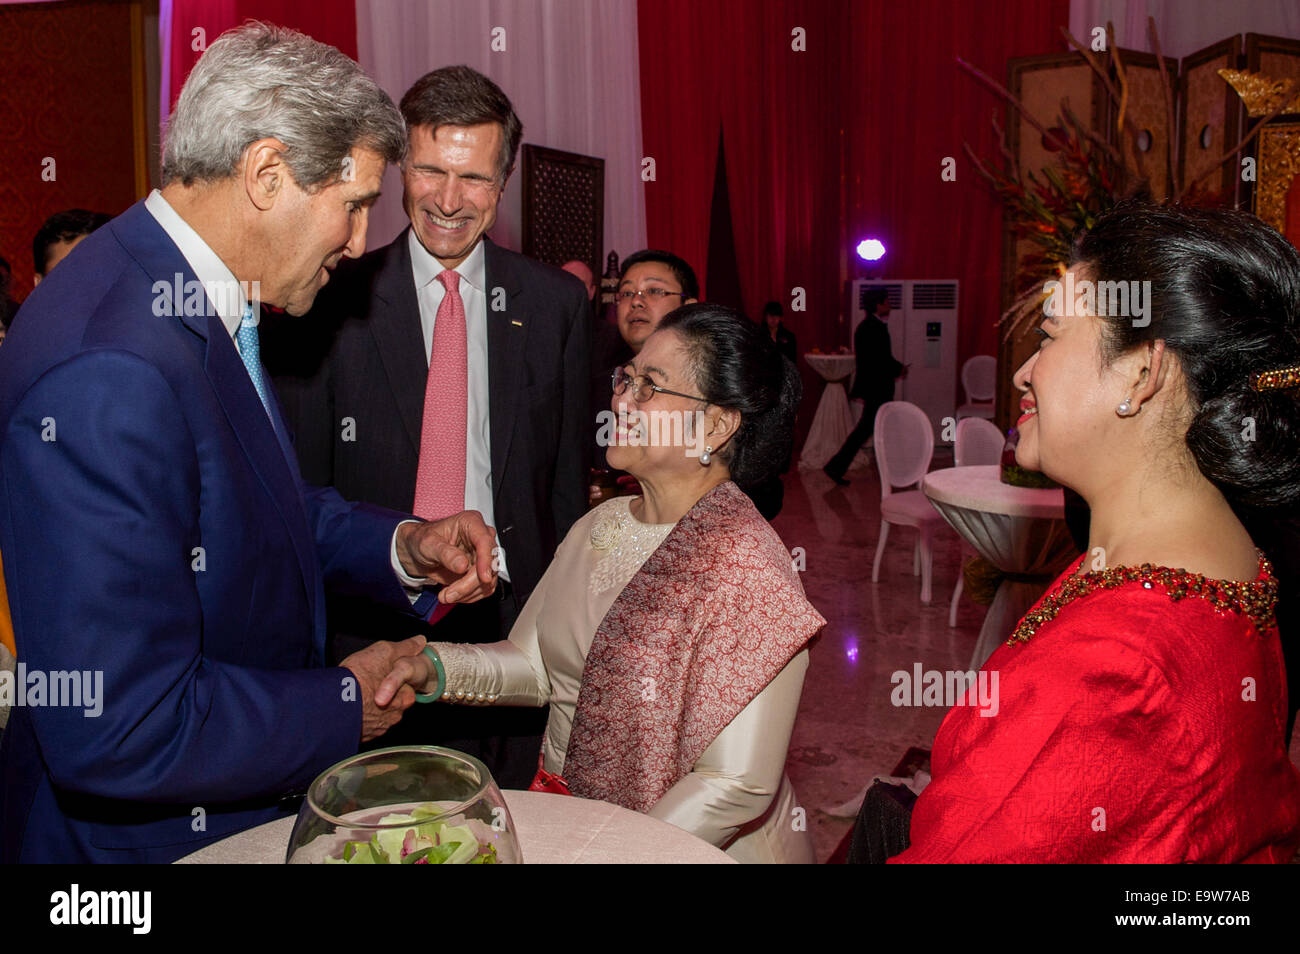 U.S. Secretary of State John Kerry chats with former President of Indonesia Megawati Sukarnoputri and her daughter, Puan Maharani, at a reception after representing President Obama at inauguration ceremonies for Indonesian President Joko Widodo in Jakarta Stock Photo